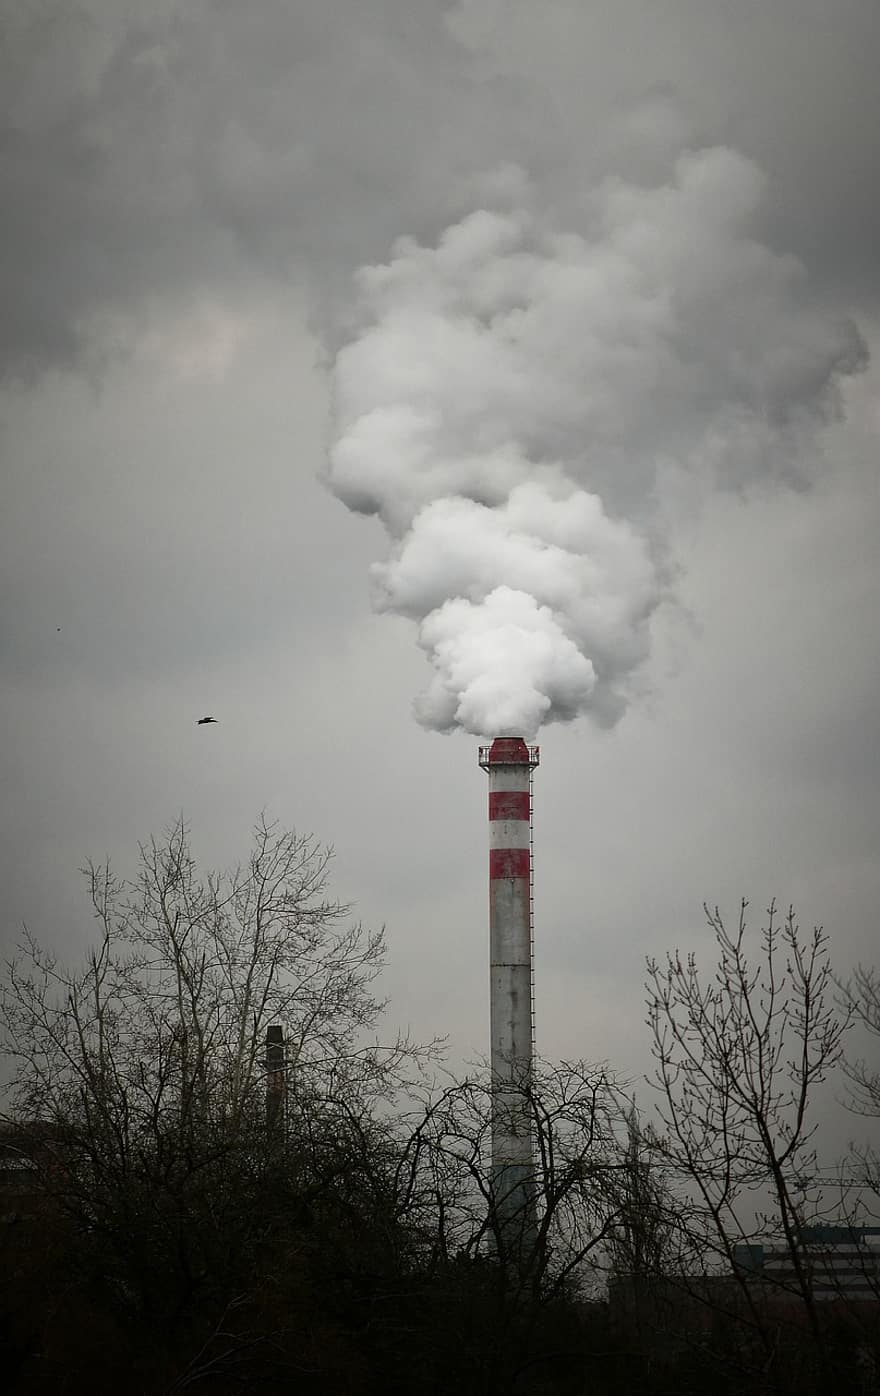 Pollution, Air, Global Warming, Smoke, Toxic, Industrial, Factory, Environment